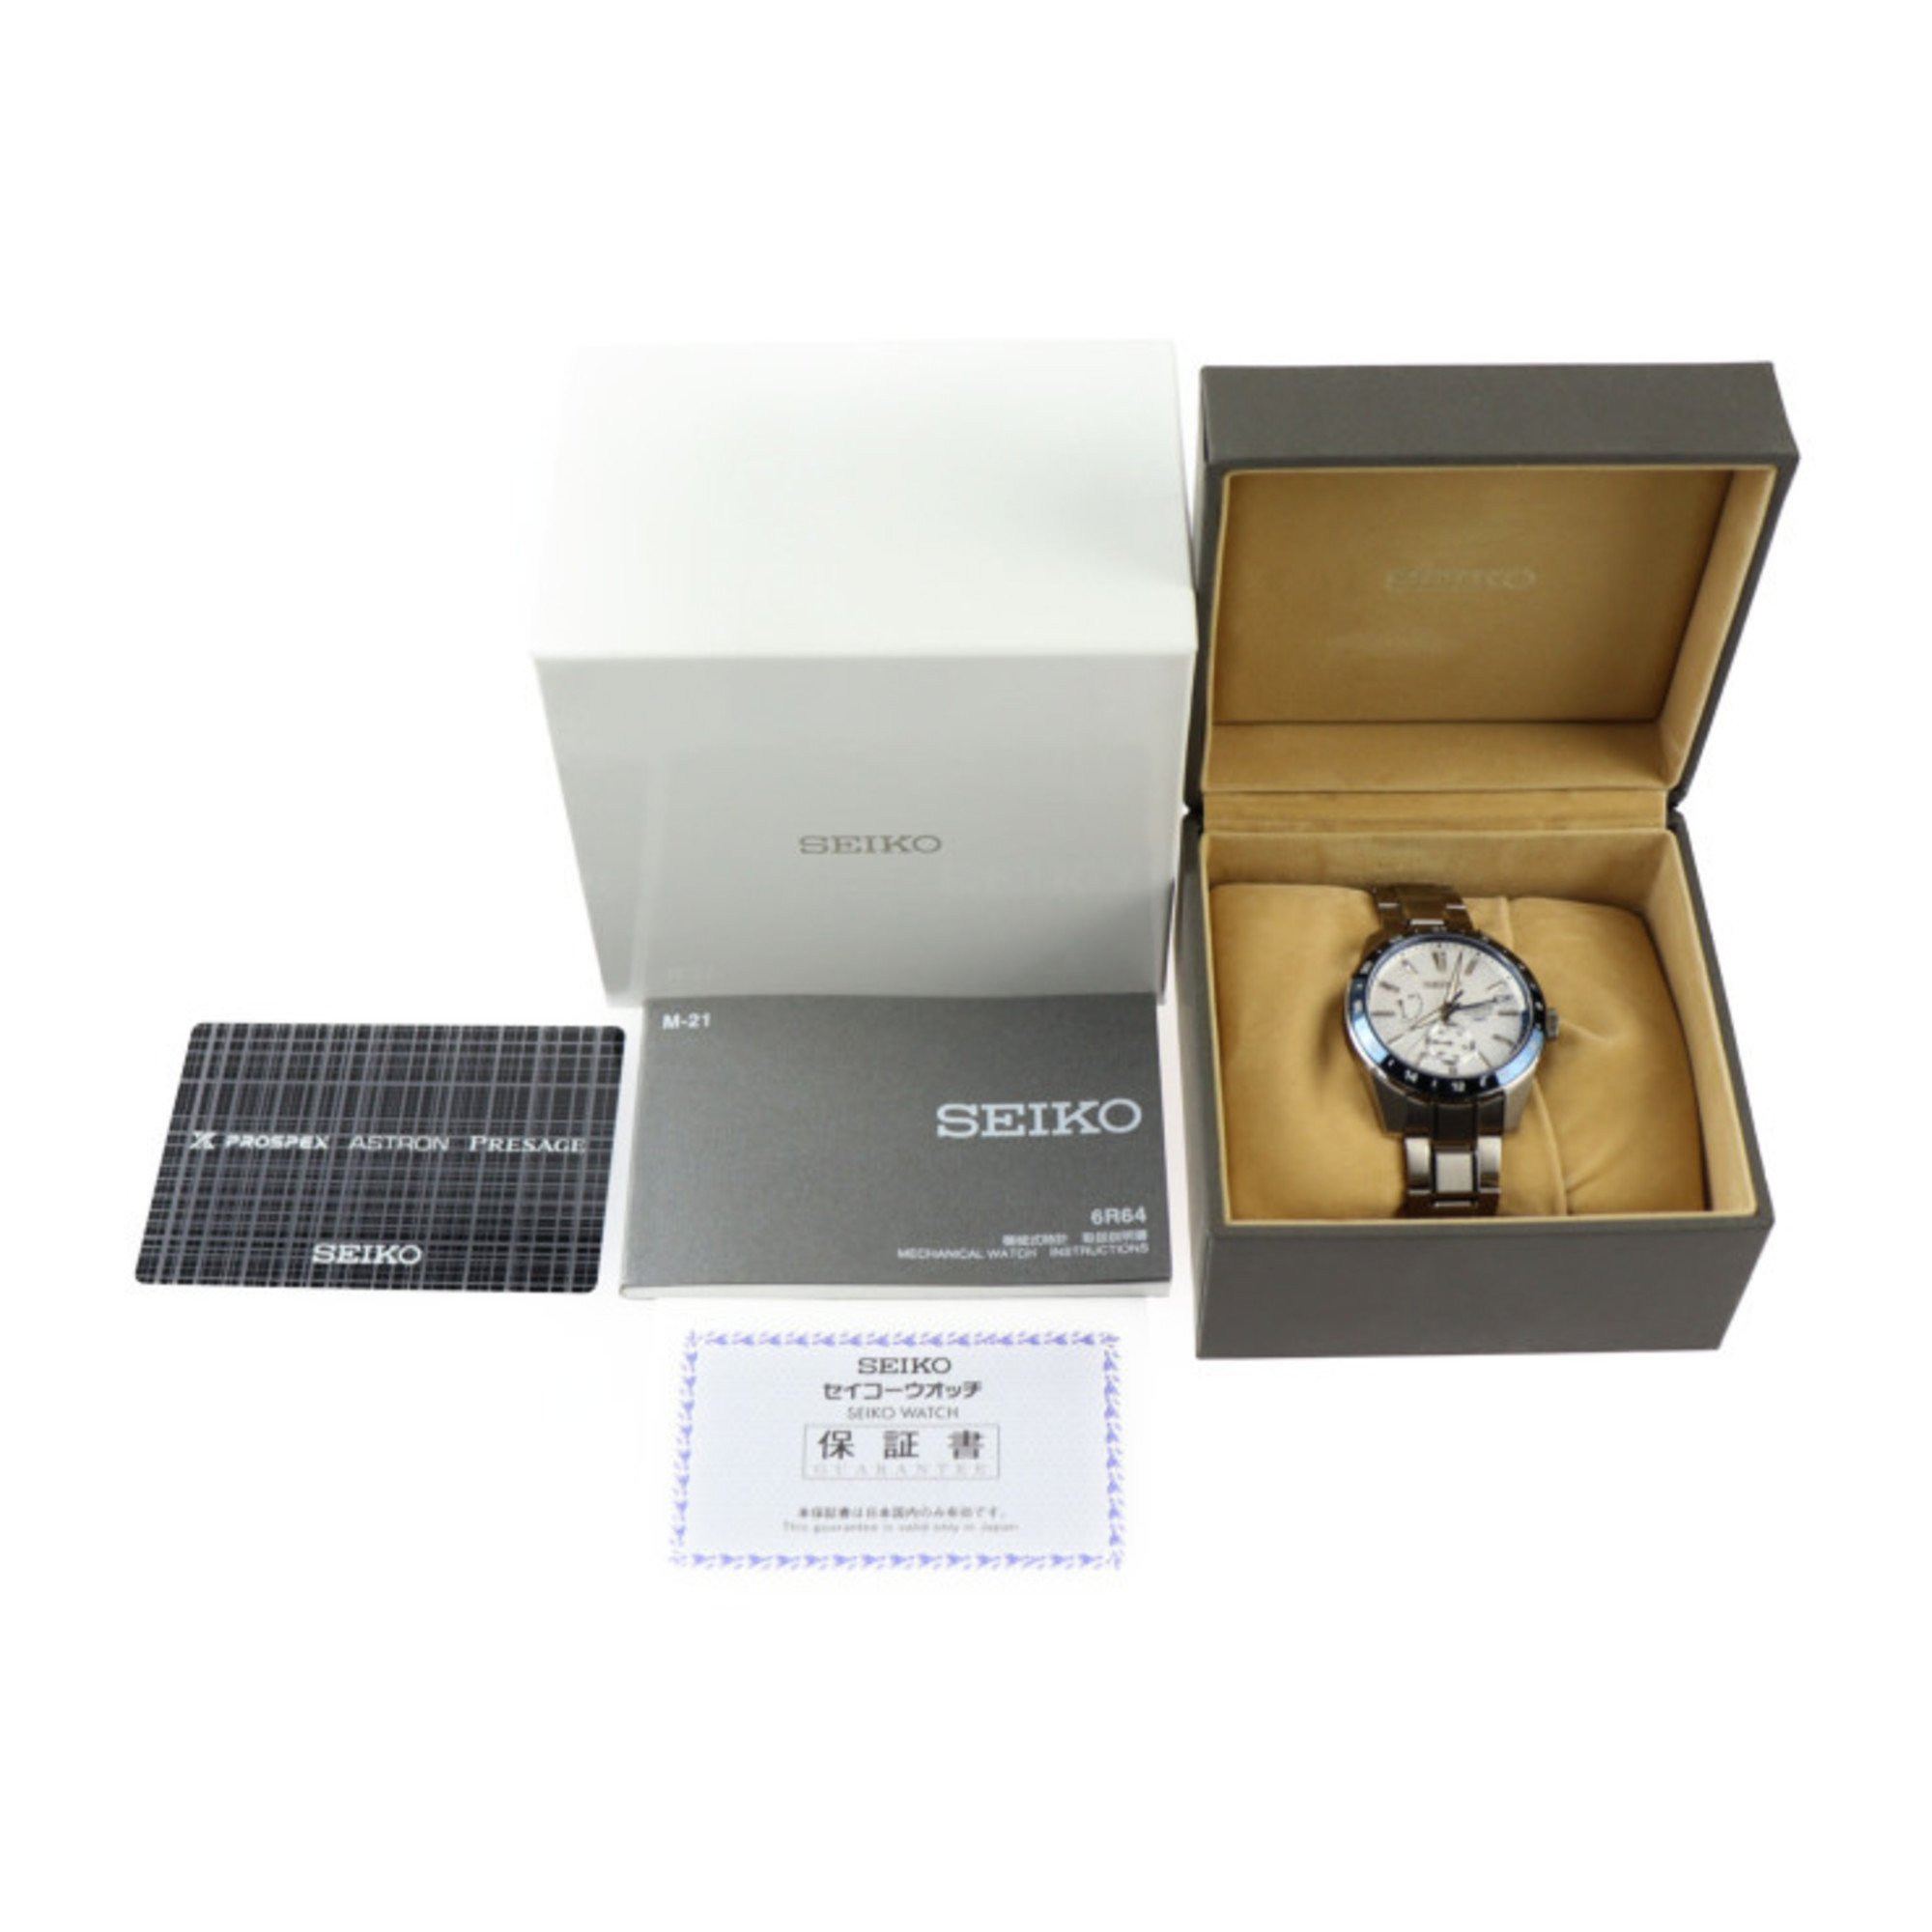 SEIKO Presage GMT Watch SARF007 6R64-00D0 Stainless Steel Silver White Dial Blue Bezel Automatic Winding Back Sketch 140th Anniversary Limited Model